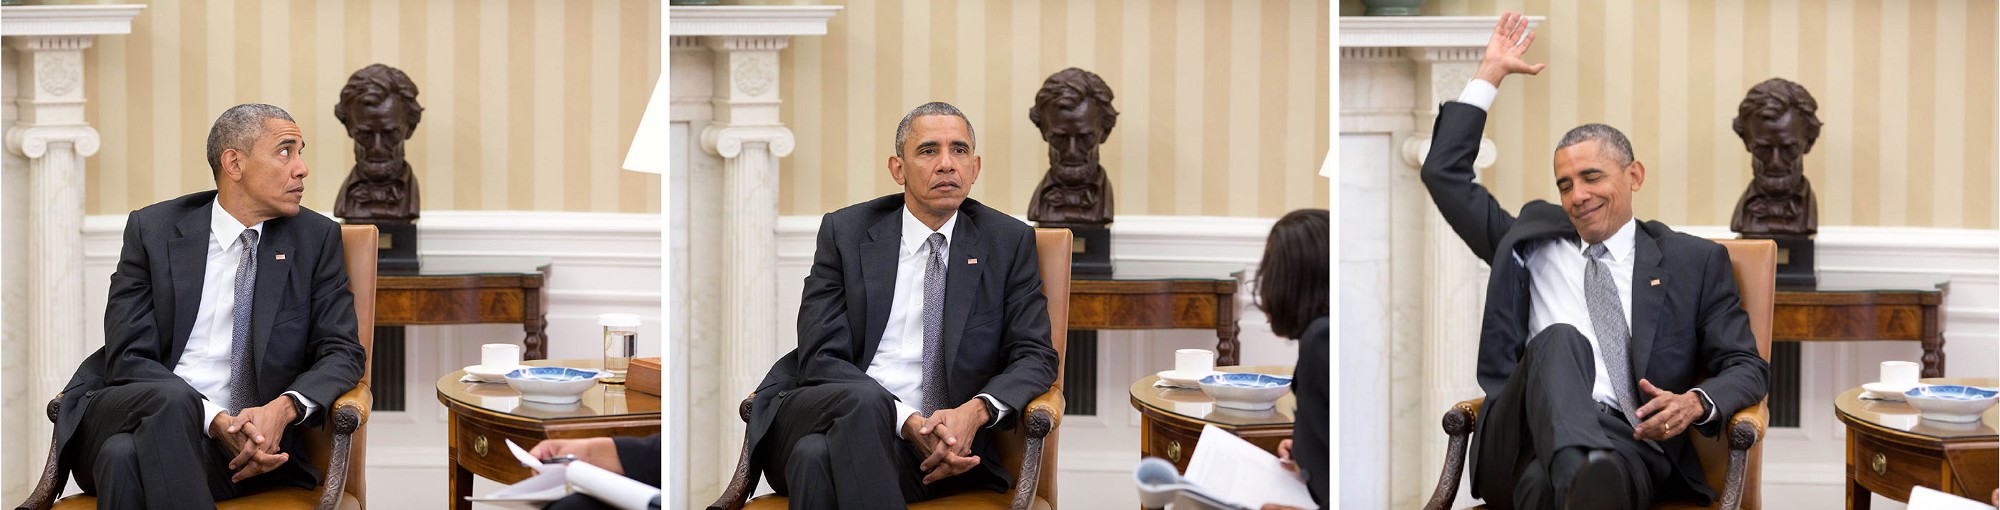 President Obama reacts as he is told of the ACA decision. (Official White House Photo by Pete Souza)